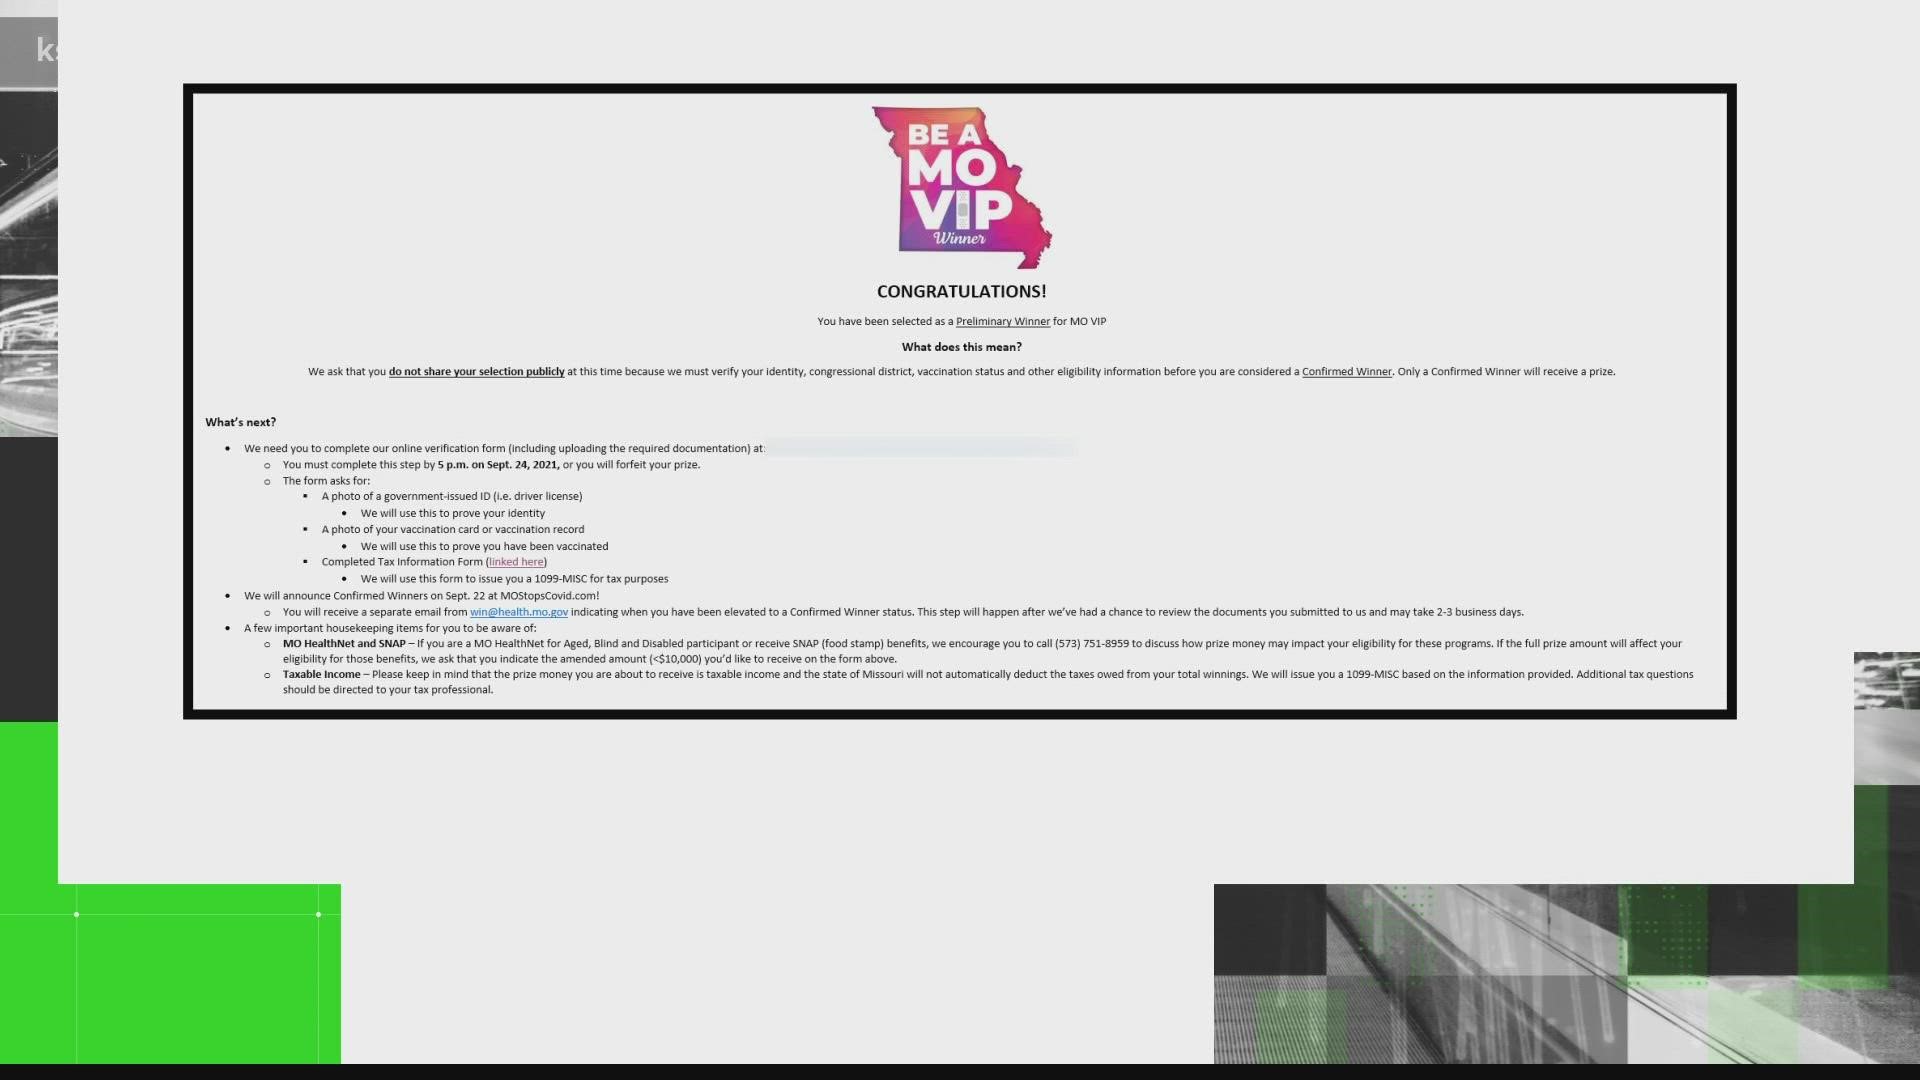 One viewer who participated in the MO VIP was notified he won, but he was suspicious about the way he was told